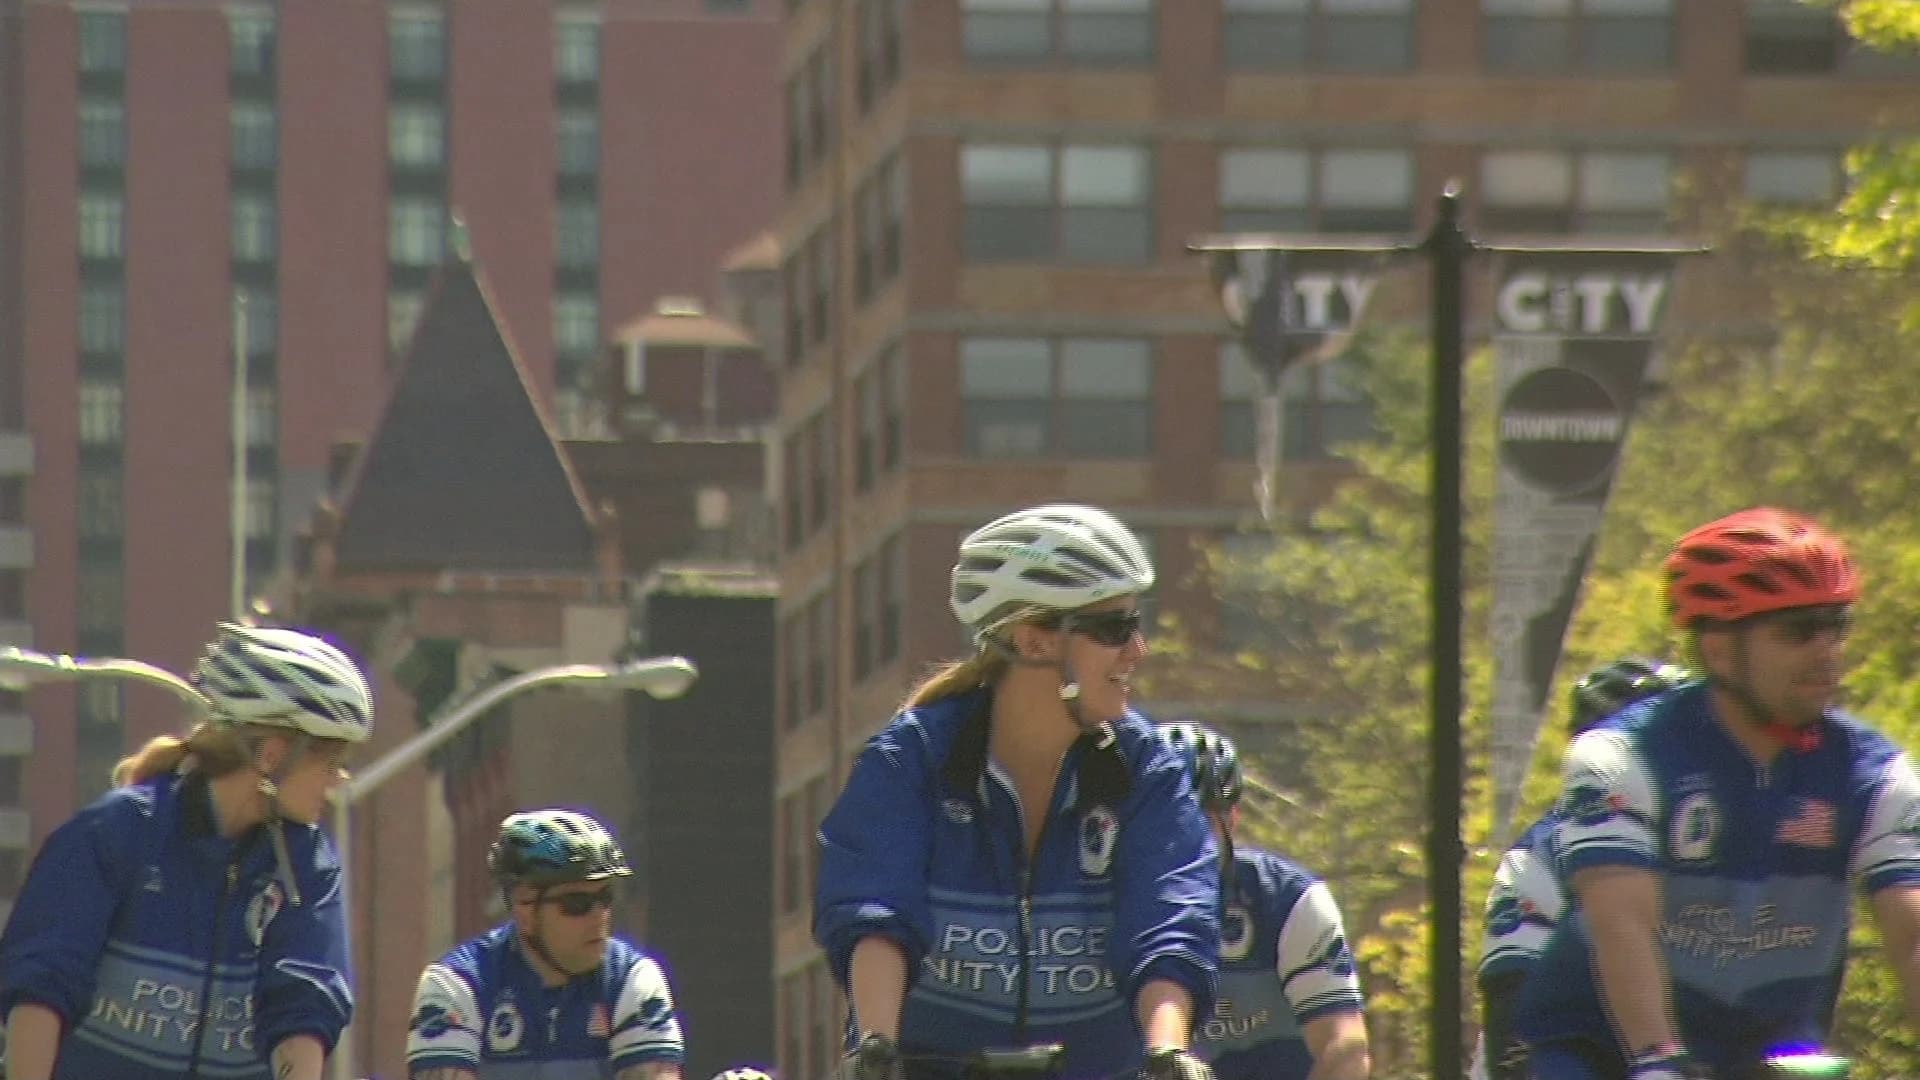 25 Nassau officers take part in Police Unity Tour